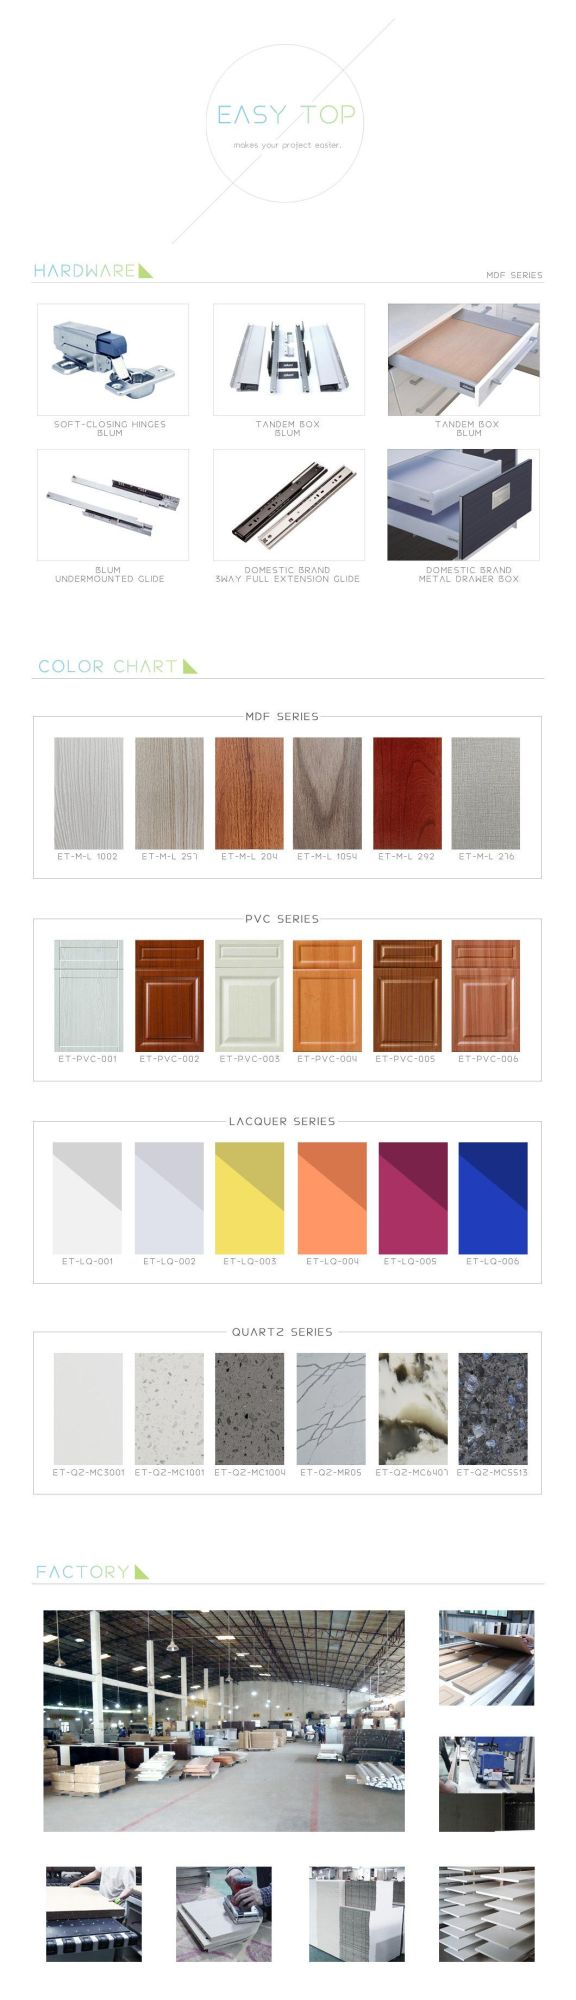 High Gloss Curved Door Particle Board Kitchen Cabinet Furniture